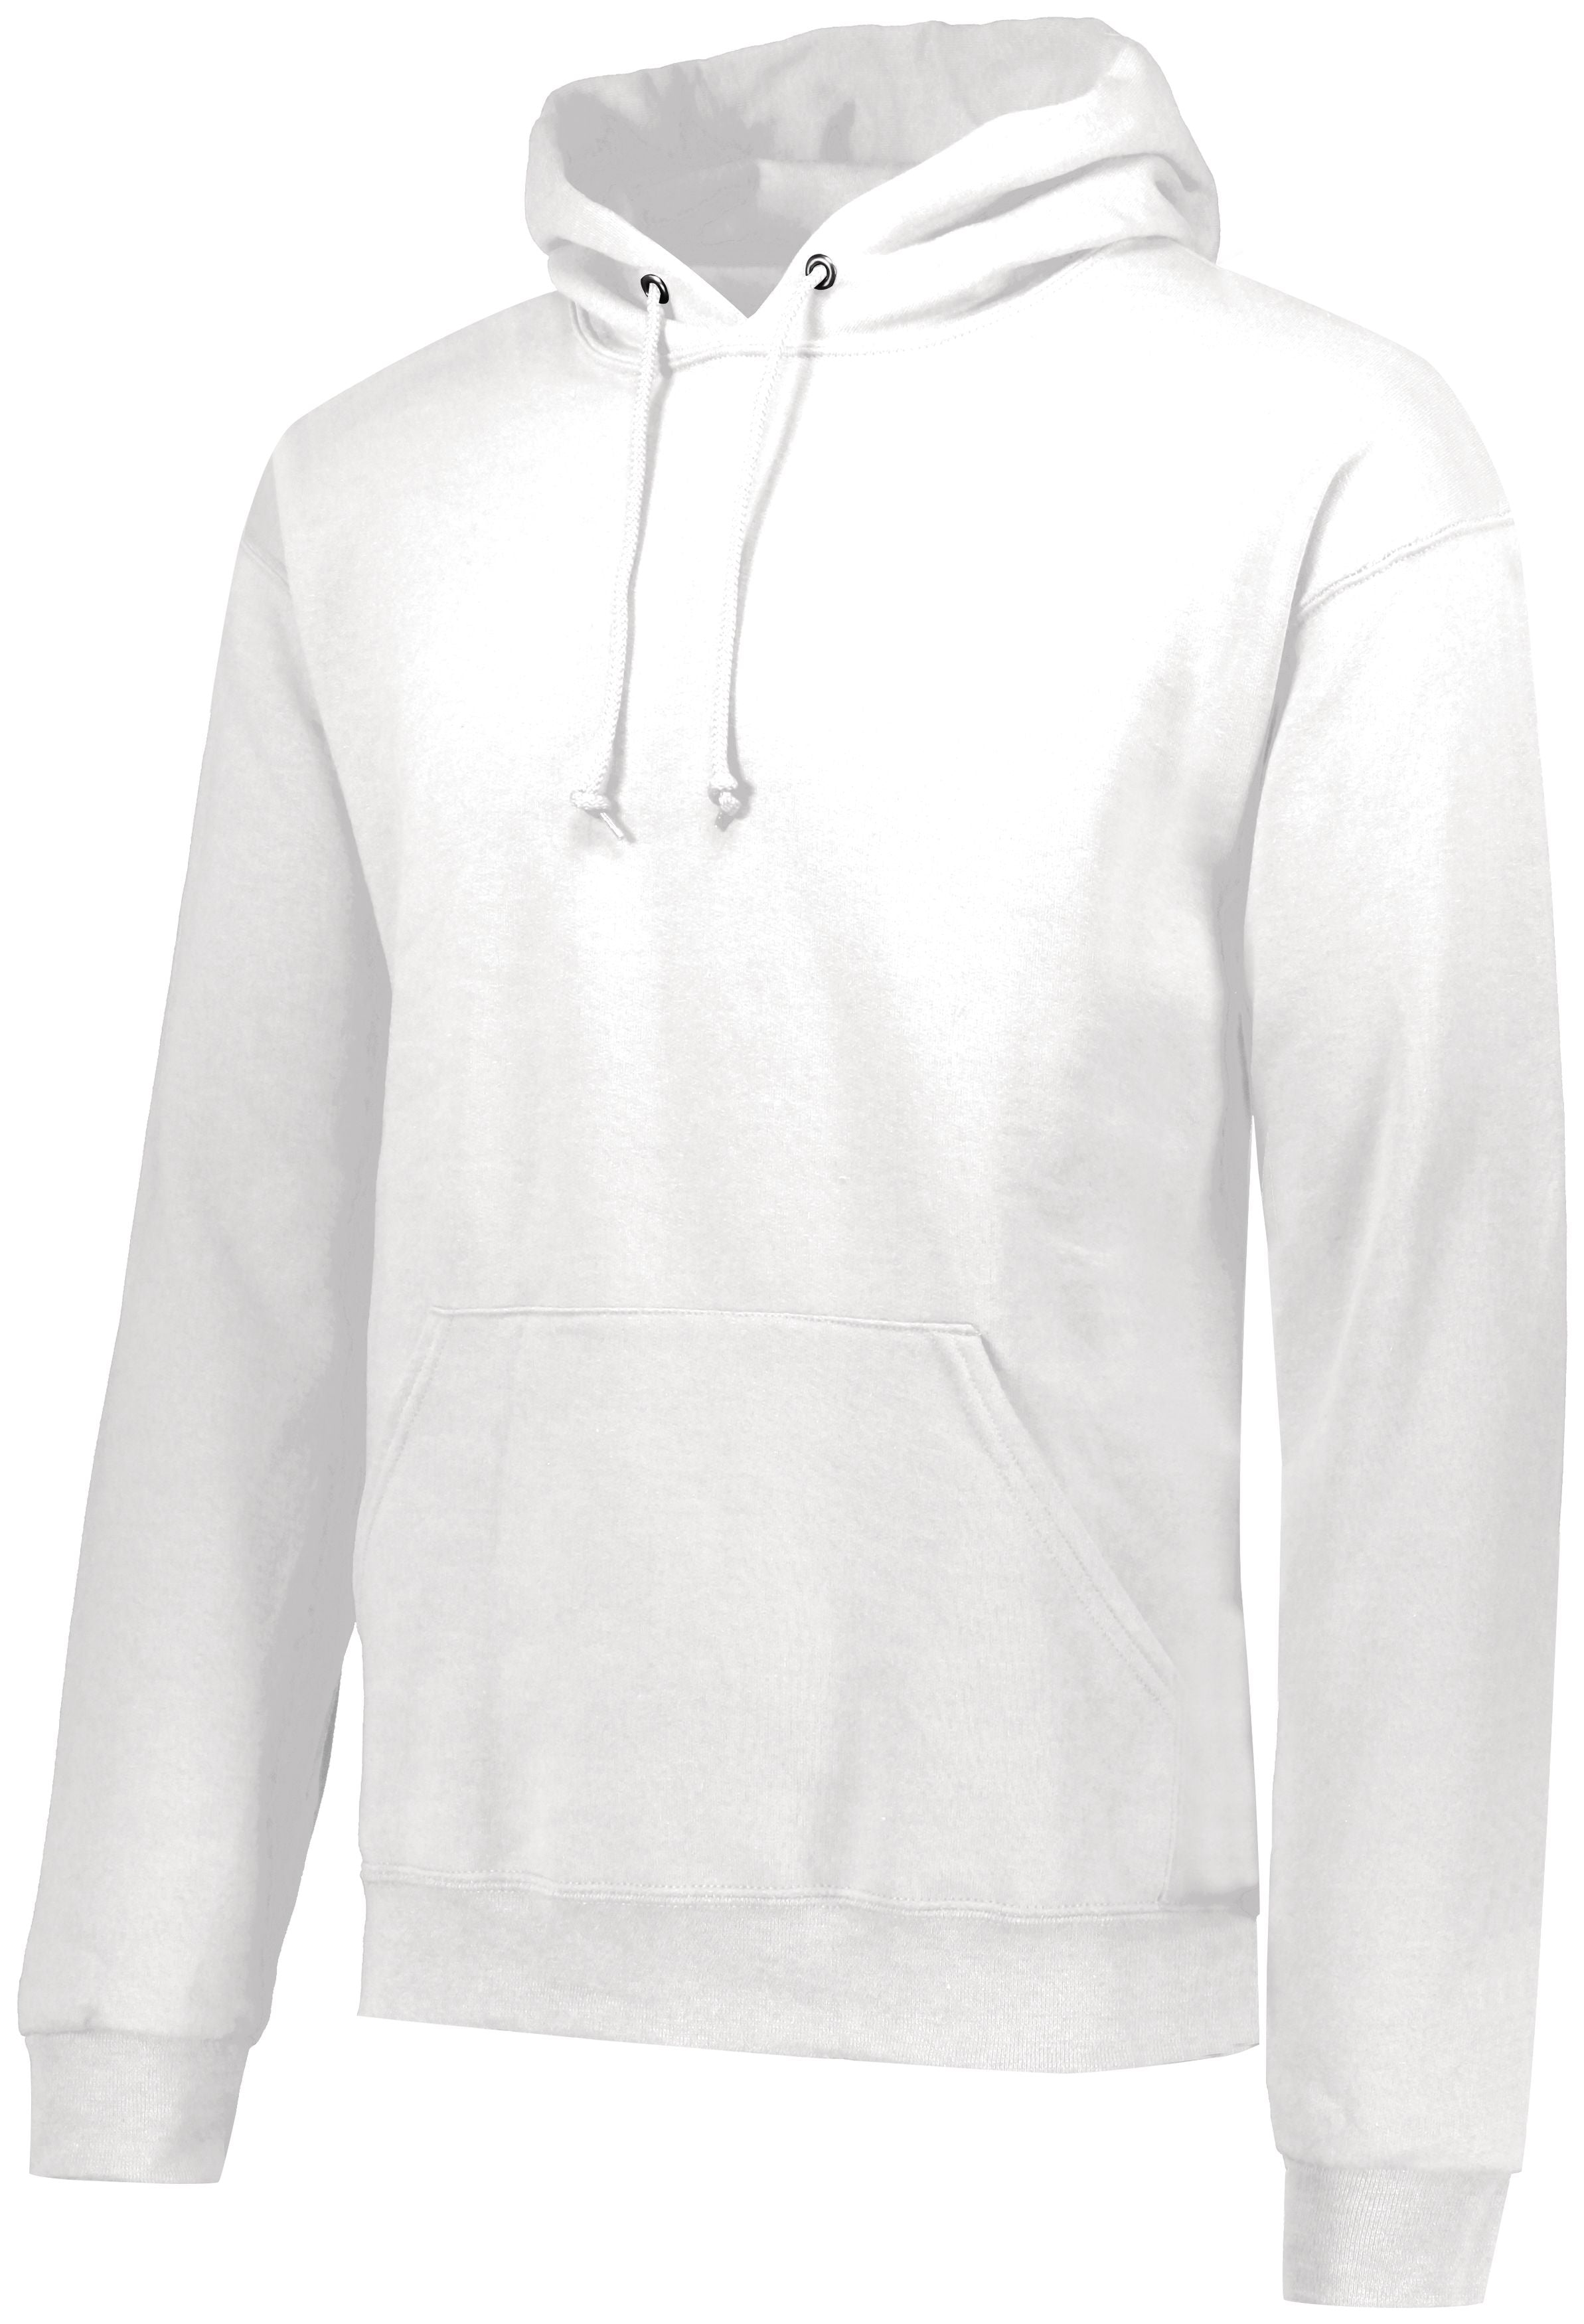 Russell Athletic Jerzees 50/50 Hoodie in White  -Part of the Adult, Russell-Athletic-Products, Shirts product lines at KanaleyCreations.com